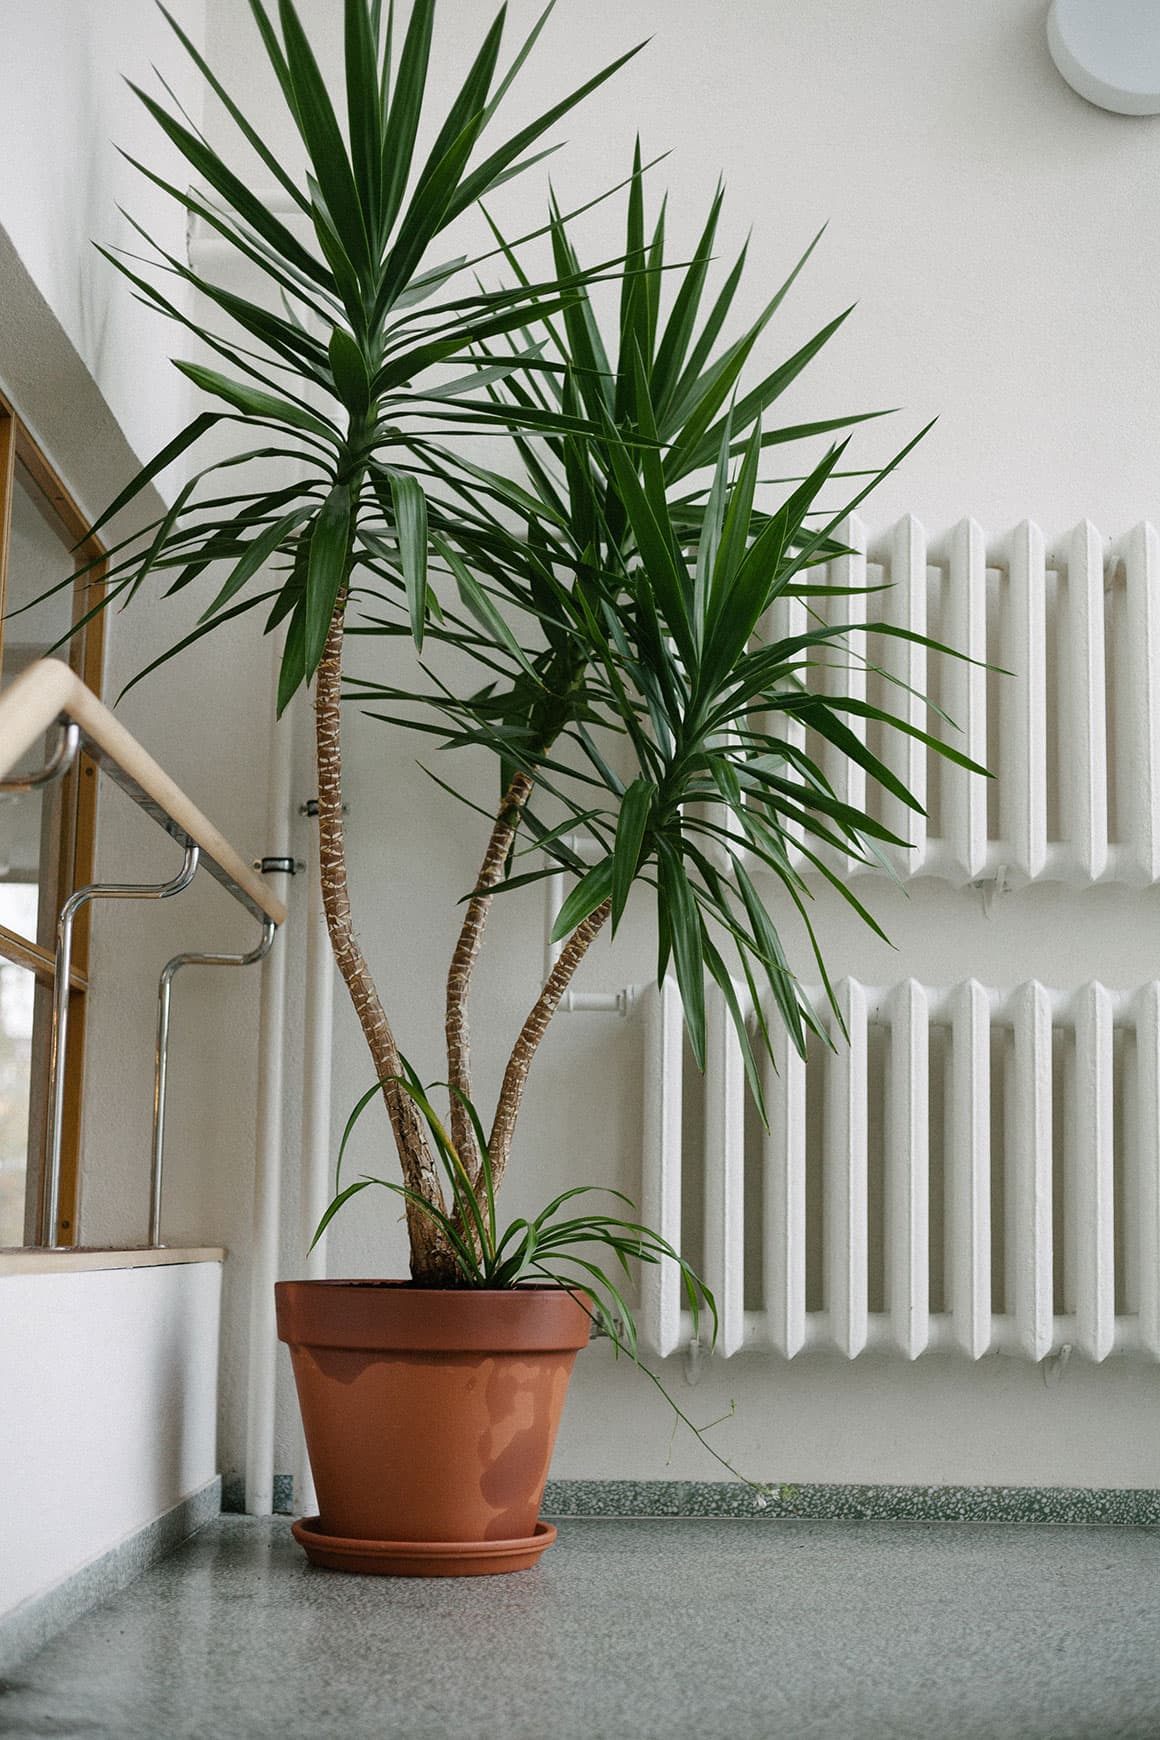 Discover the Best Tall Houseplants for Your Home